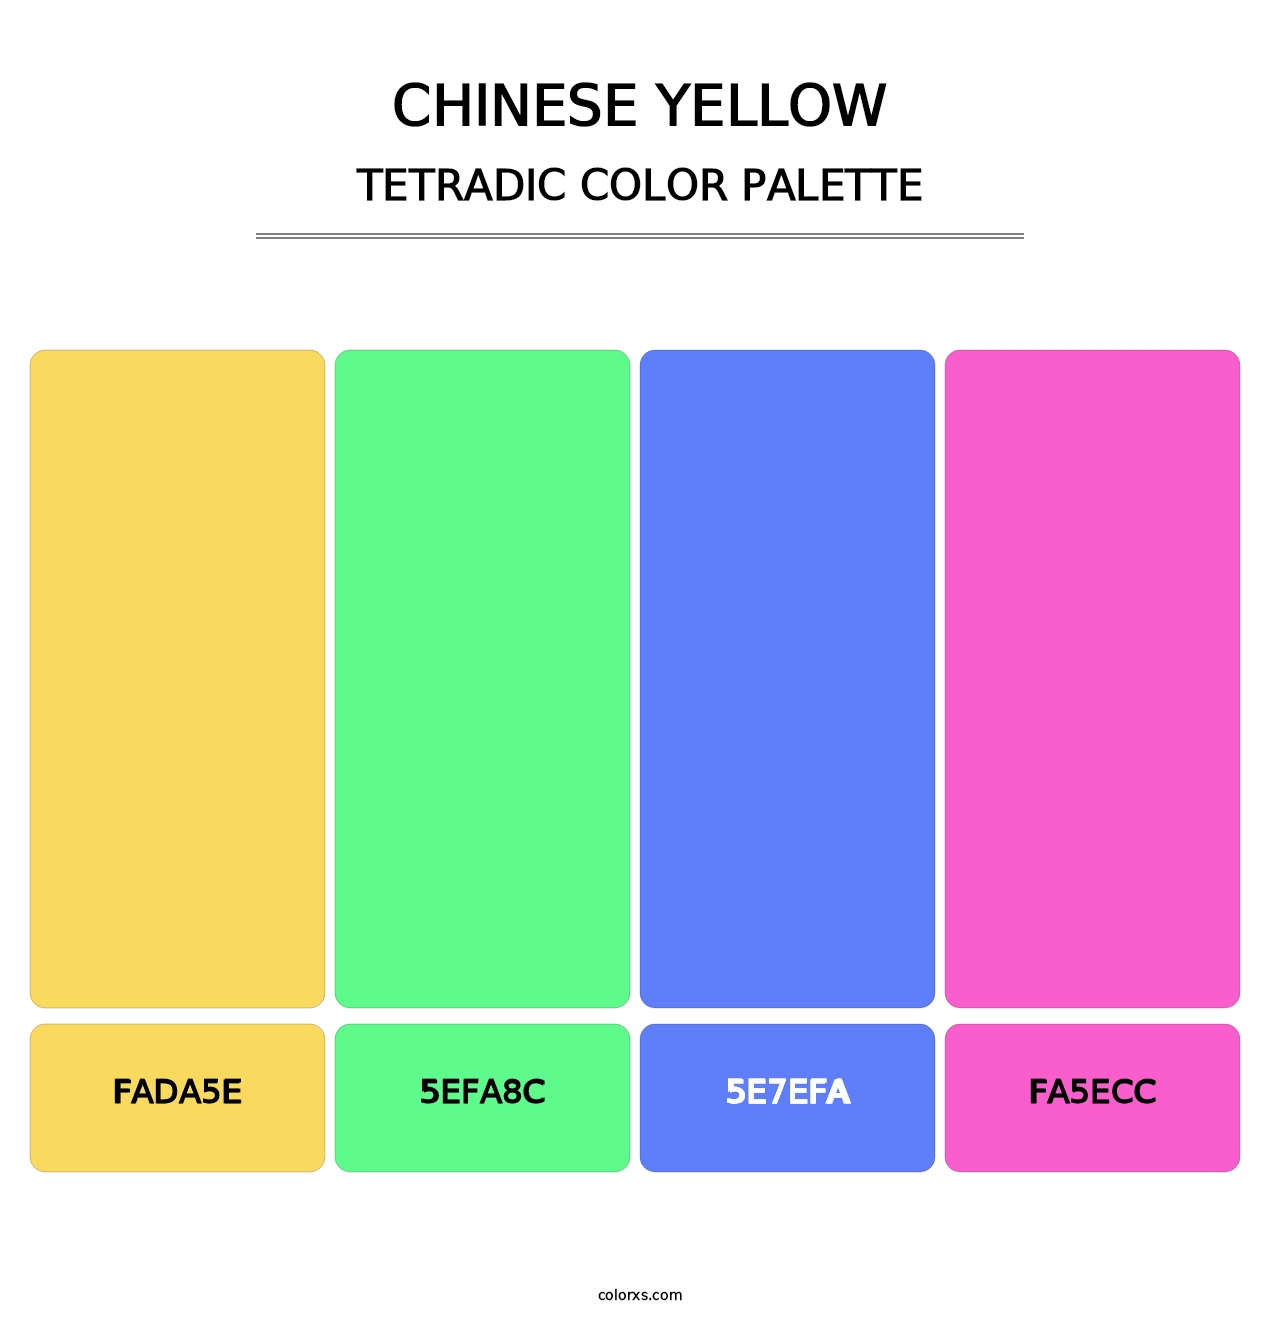 Chinese Yellow - Tetradic Color Palette